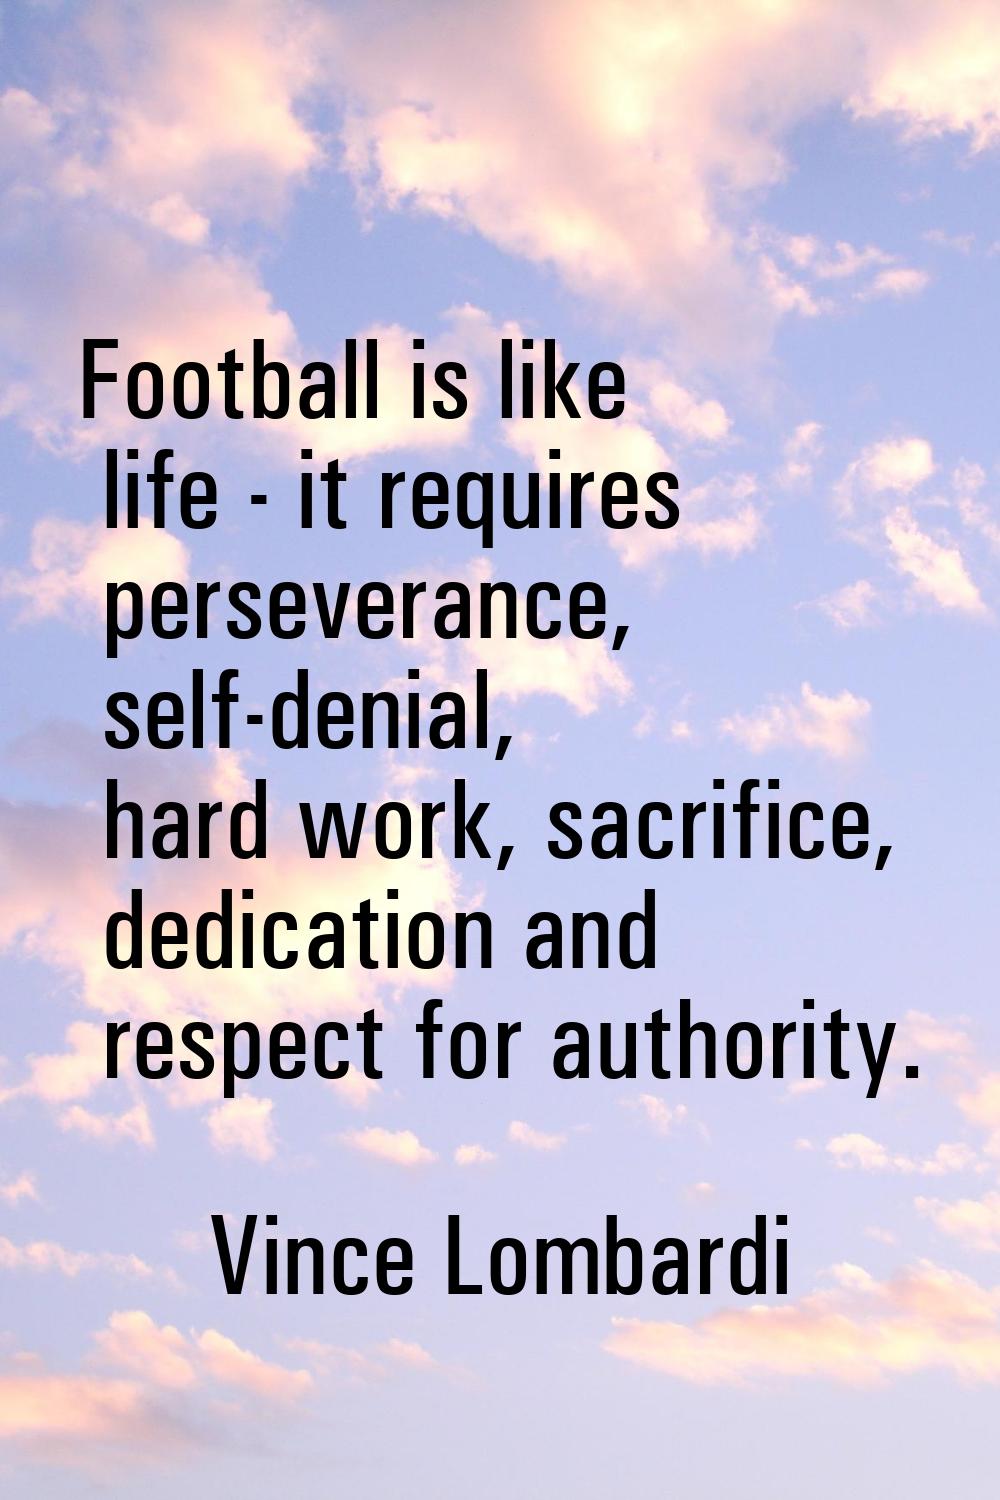 Football is like life - it requires perseverance, self-denial, hard work, sacrifice, dedication and